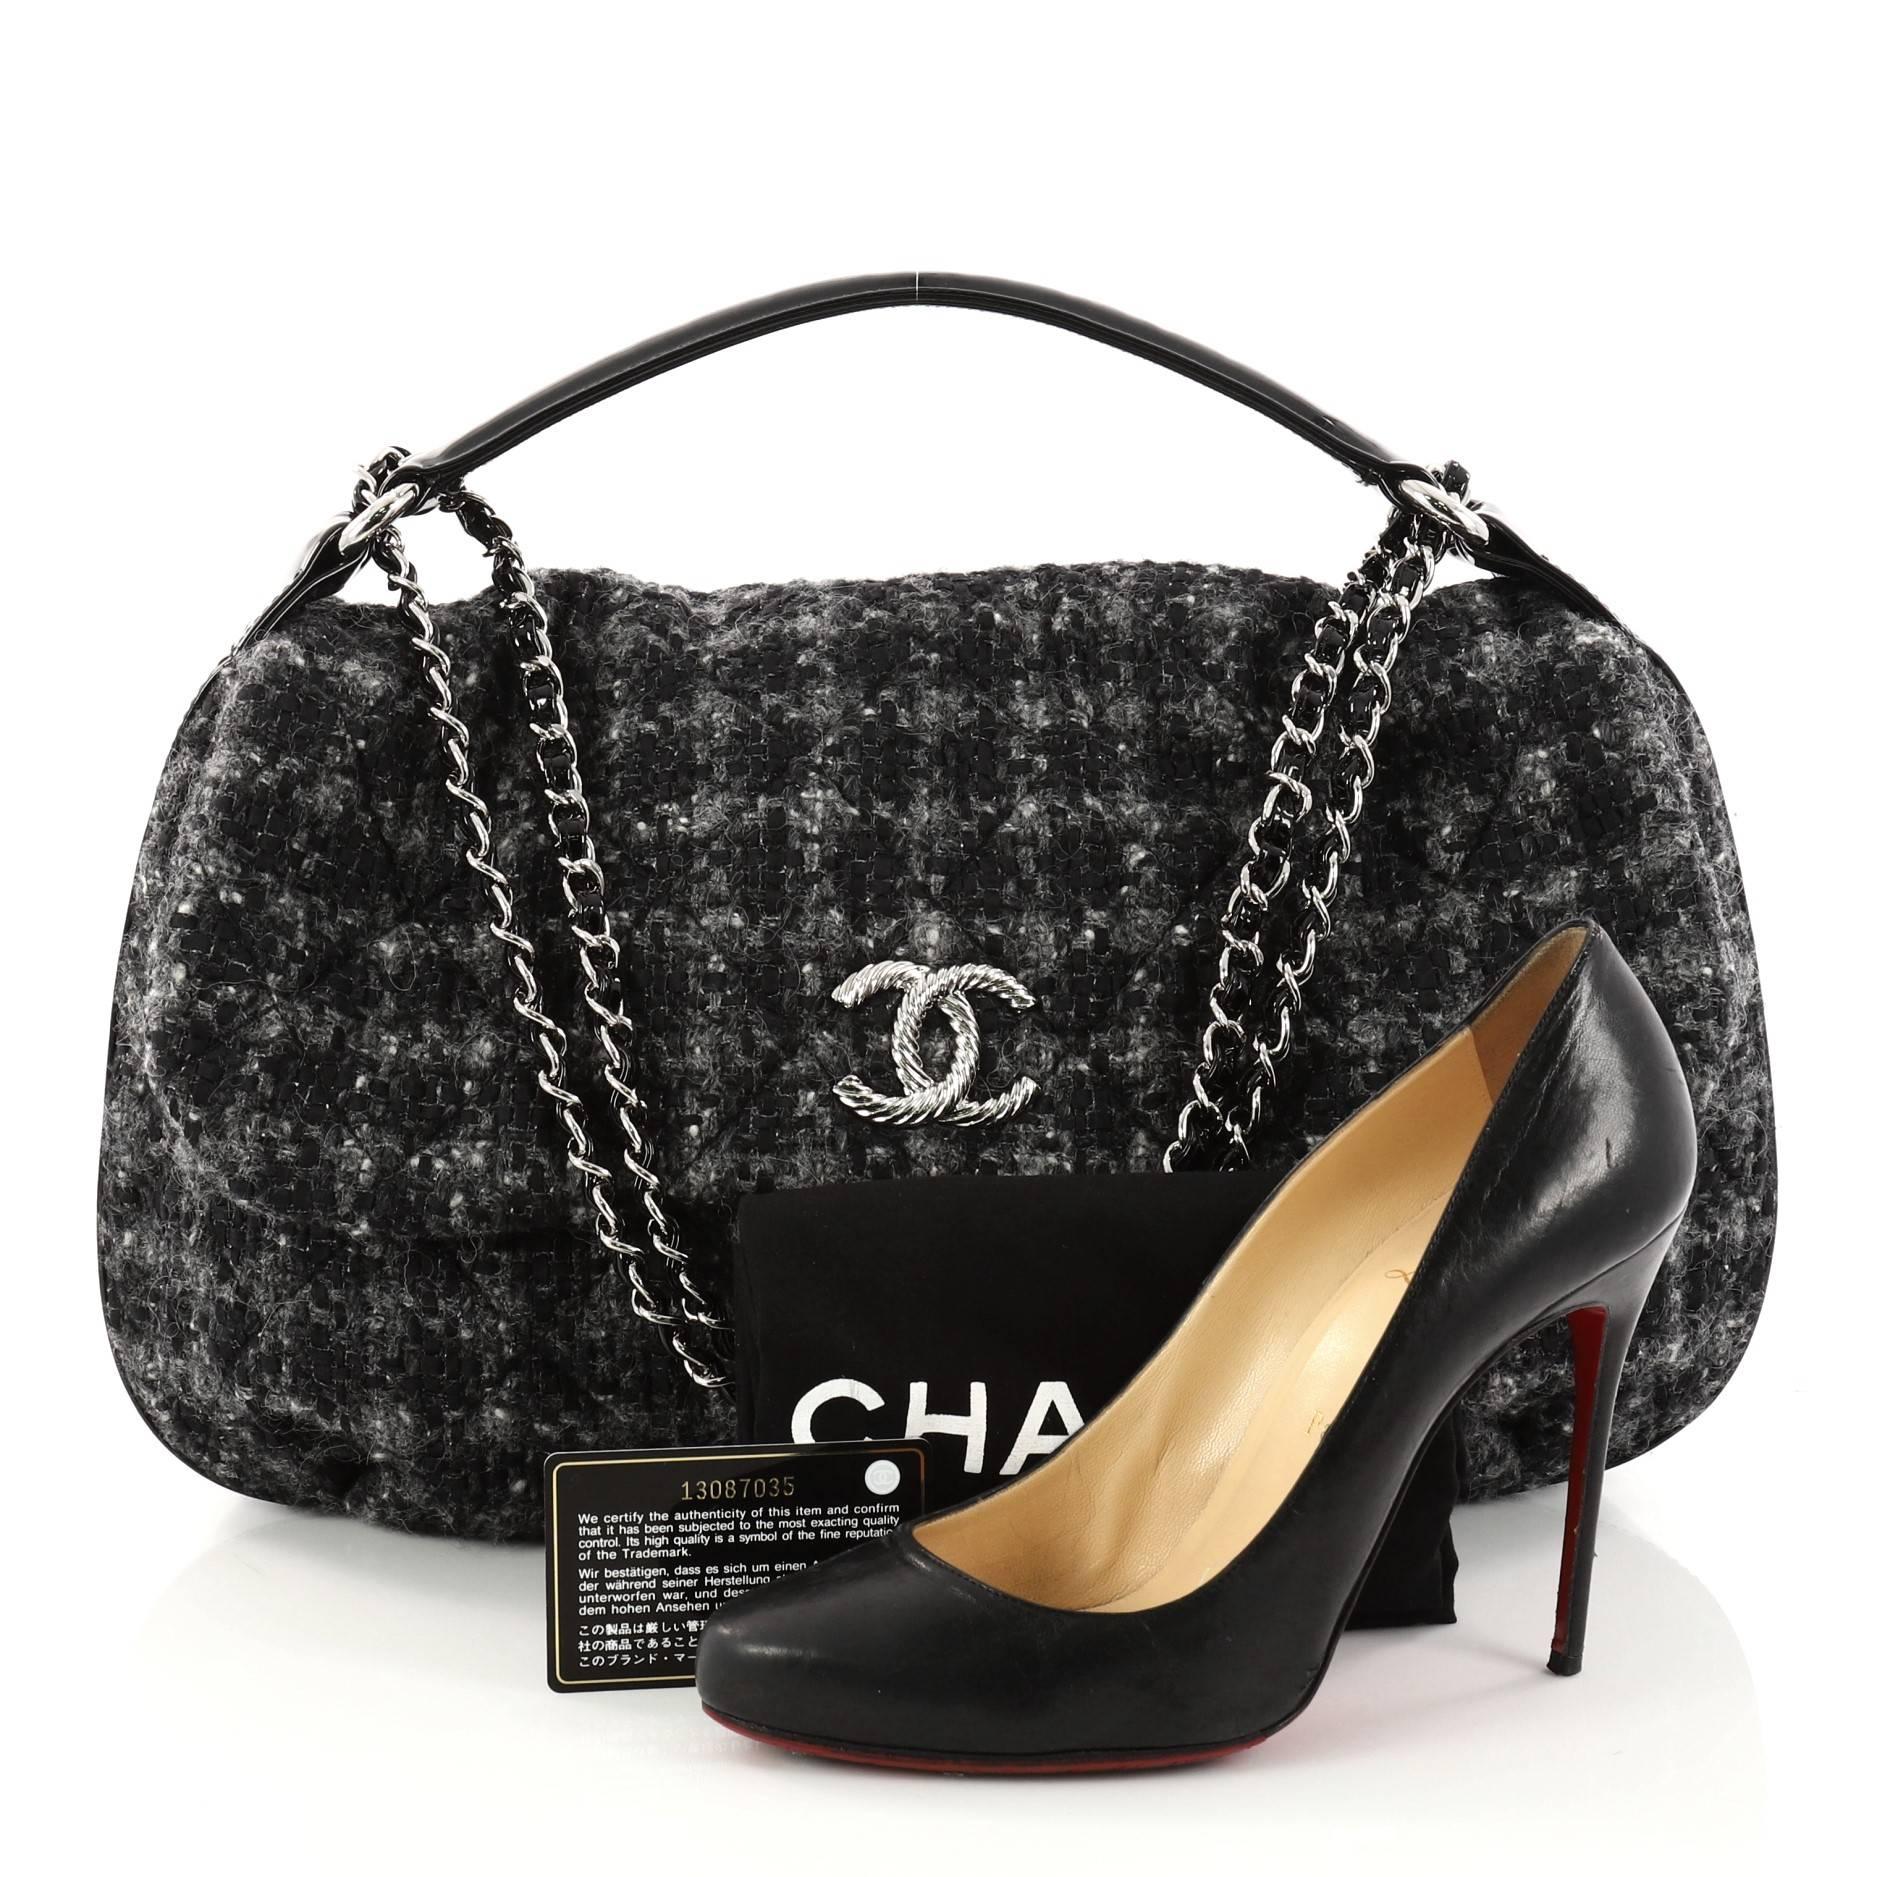 This authentic Chanel CC Flap Satchel Quilted Tweed Medium mixes youthful elegance with a timeless flair. Crafted in quilted black tweed with patent leather trims, this luxurious satchel features a single loop patent leather handle, woven-in leather